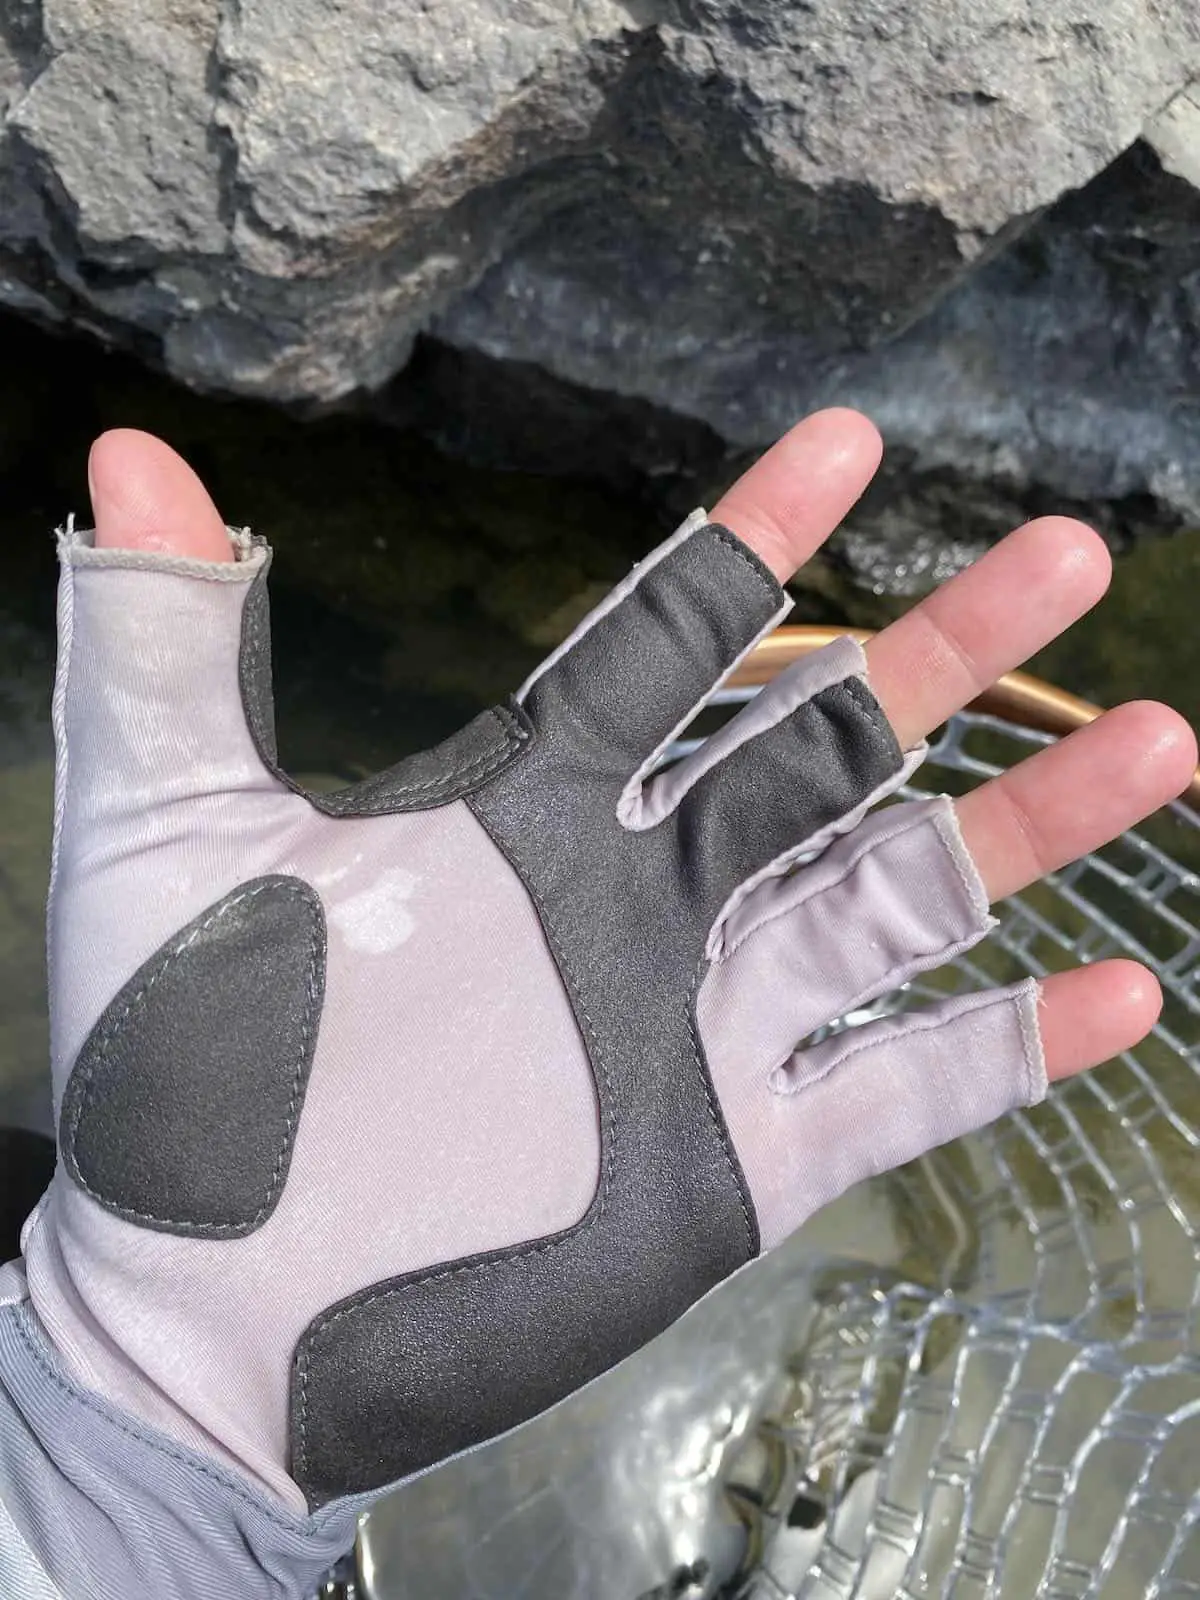 Best Ice Fishing Gloves - Protect Your Hands From Cold!